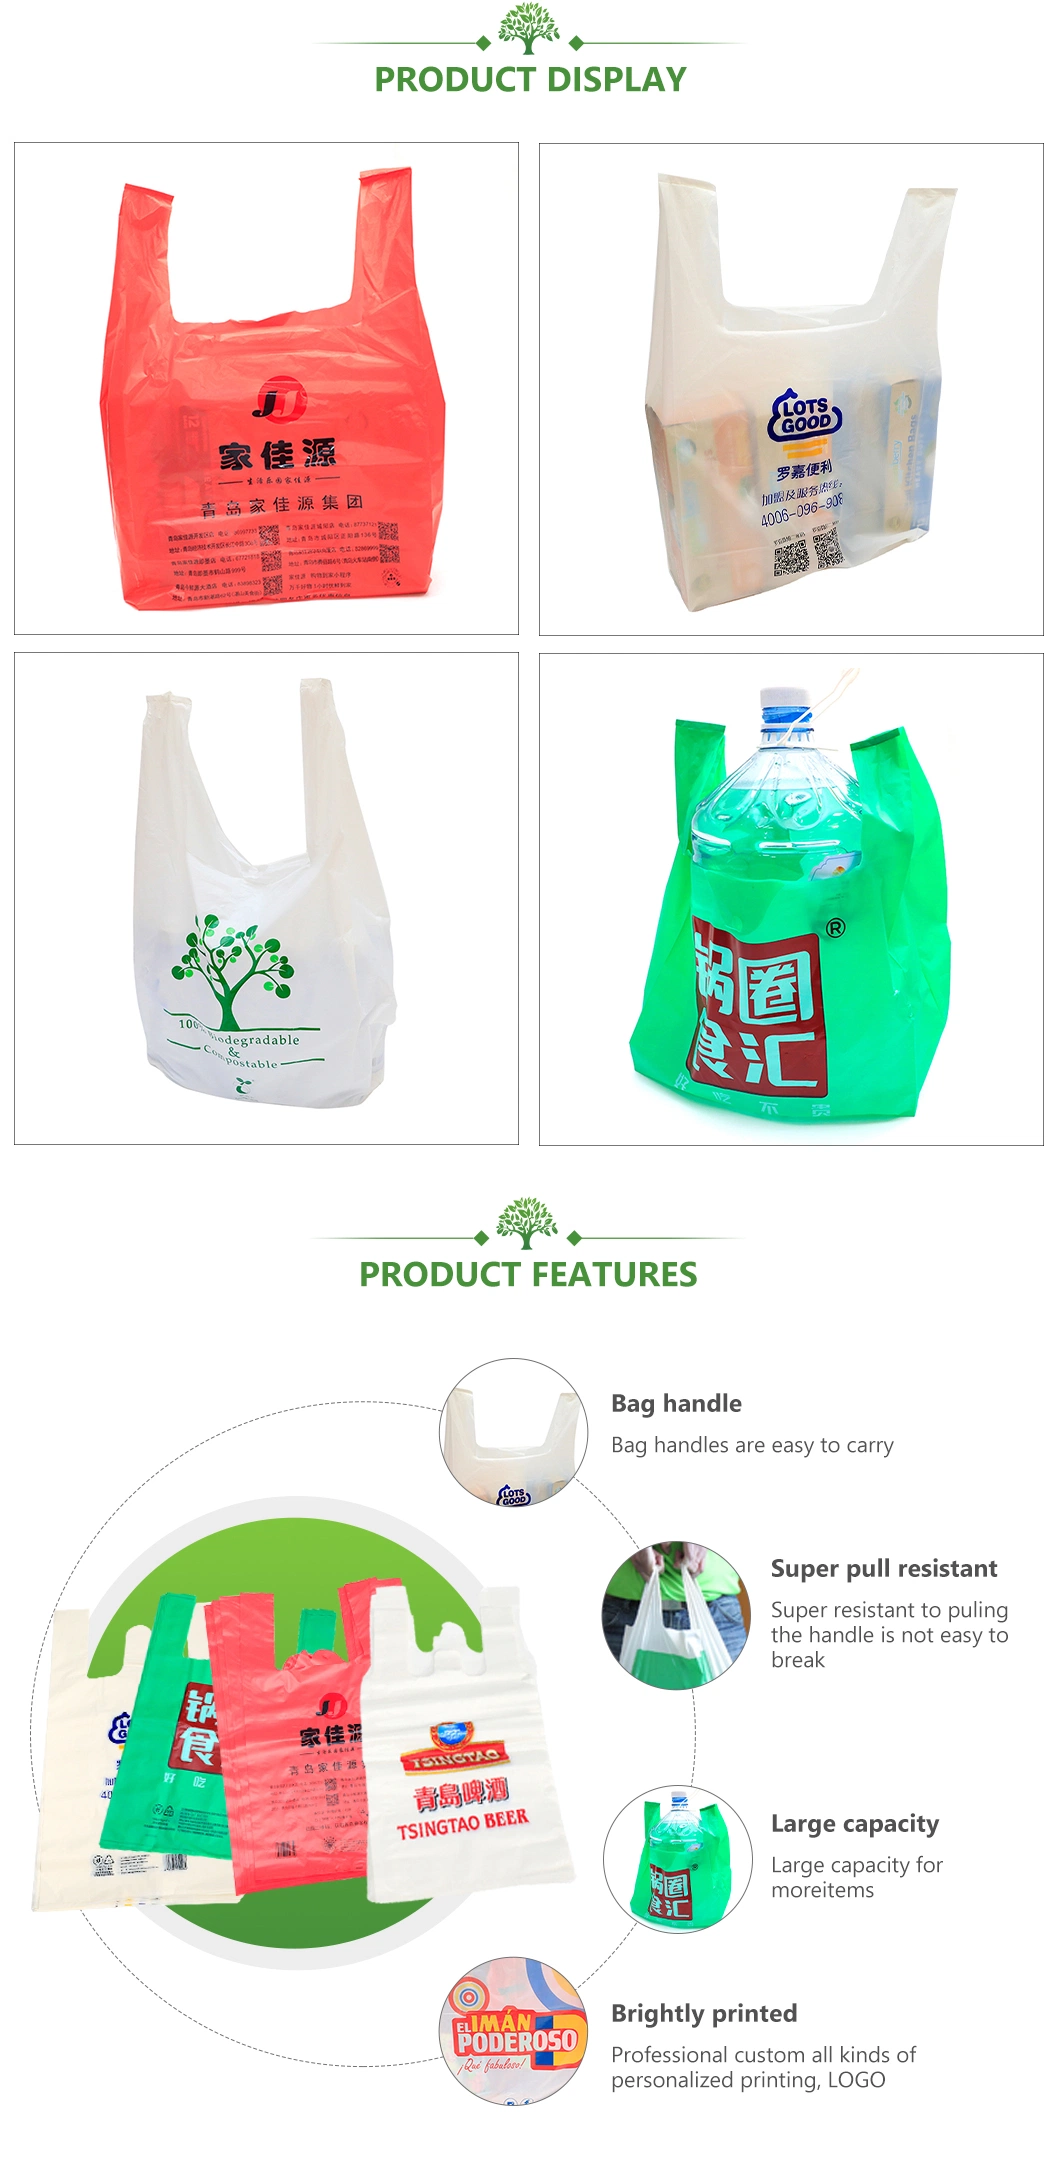 Custom Biodegradable Bags/T-Shirt/Shopping Bags/Supermarket Bags/on a Roller/Take-out/Packaging/Envelope/Trush/Garbage Bags Manufacturer with FDA and Print Logo